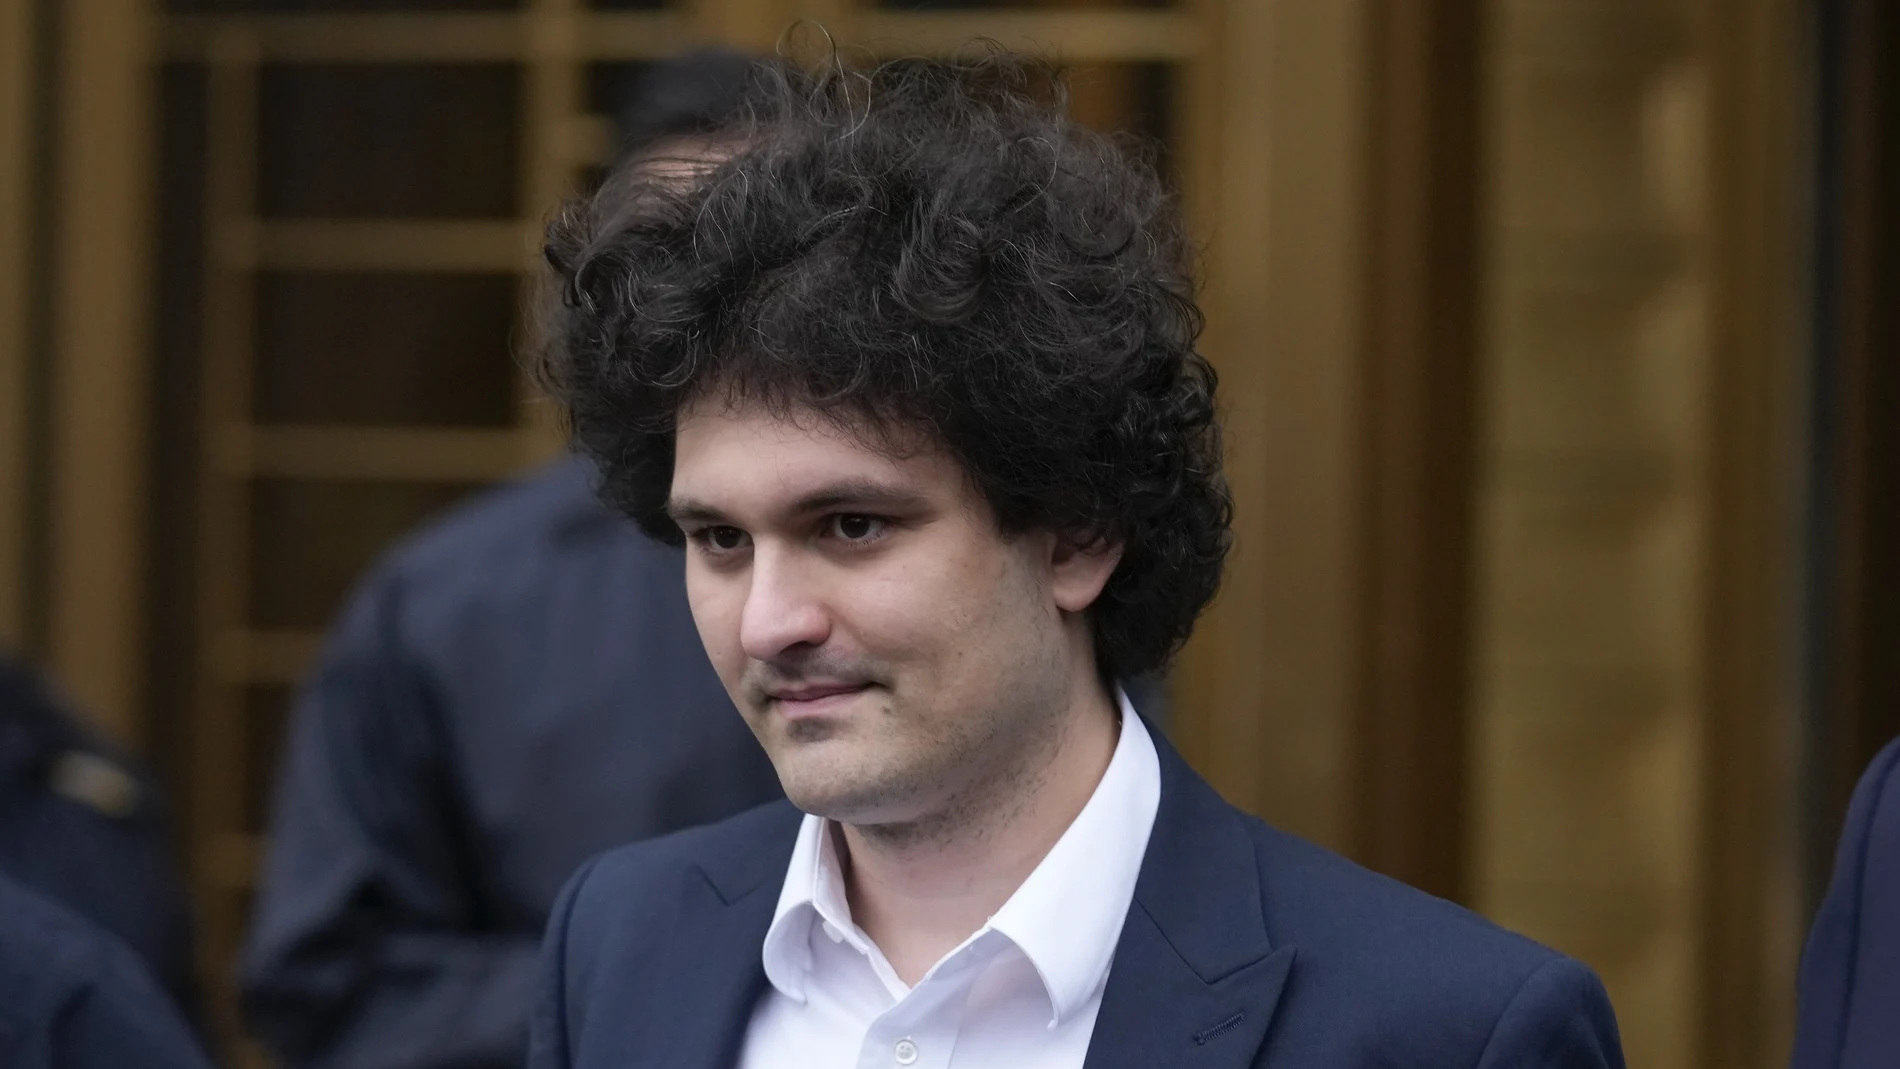 Samuel Bankman-Fried leaves Manhattan federal court in New York, Tuesday, Jan. 3, 2023. Bankman-Fried pleaded not guilty to charges that he cheated investors and looted customer deposits on his cryptocurrency trading platform as a judge set a tentative trial date for October. (AP Photo/Seth Wenig)